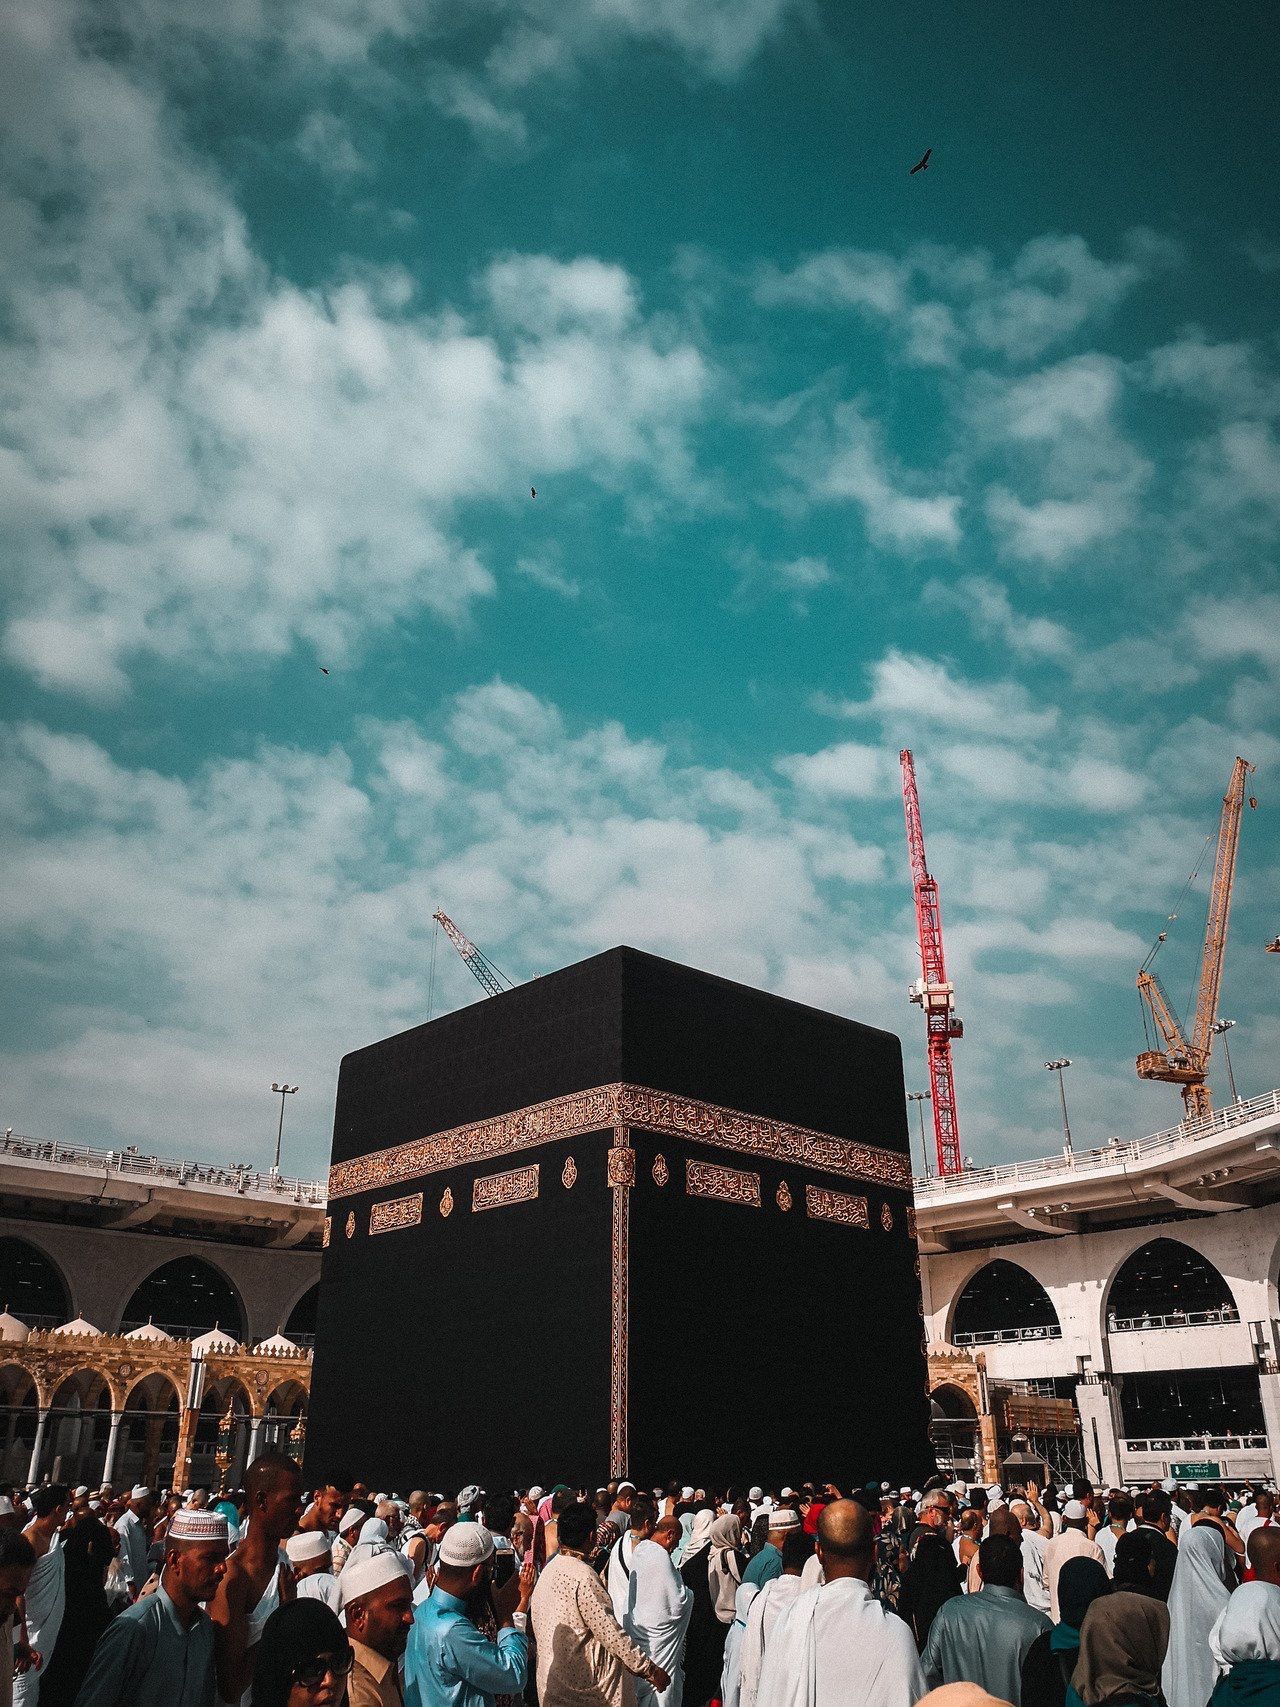 Mecca Kaaba Wallpapers Background Wallpaper Image For Free Download   Pngtree